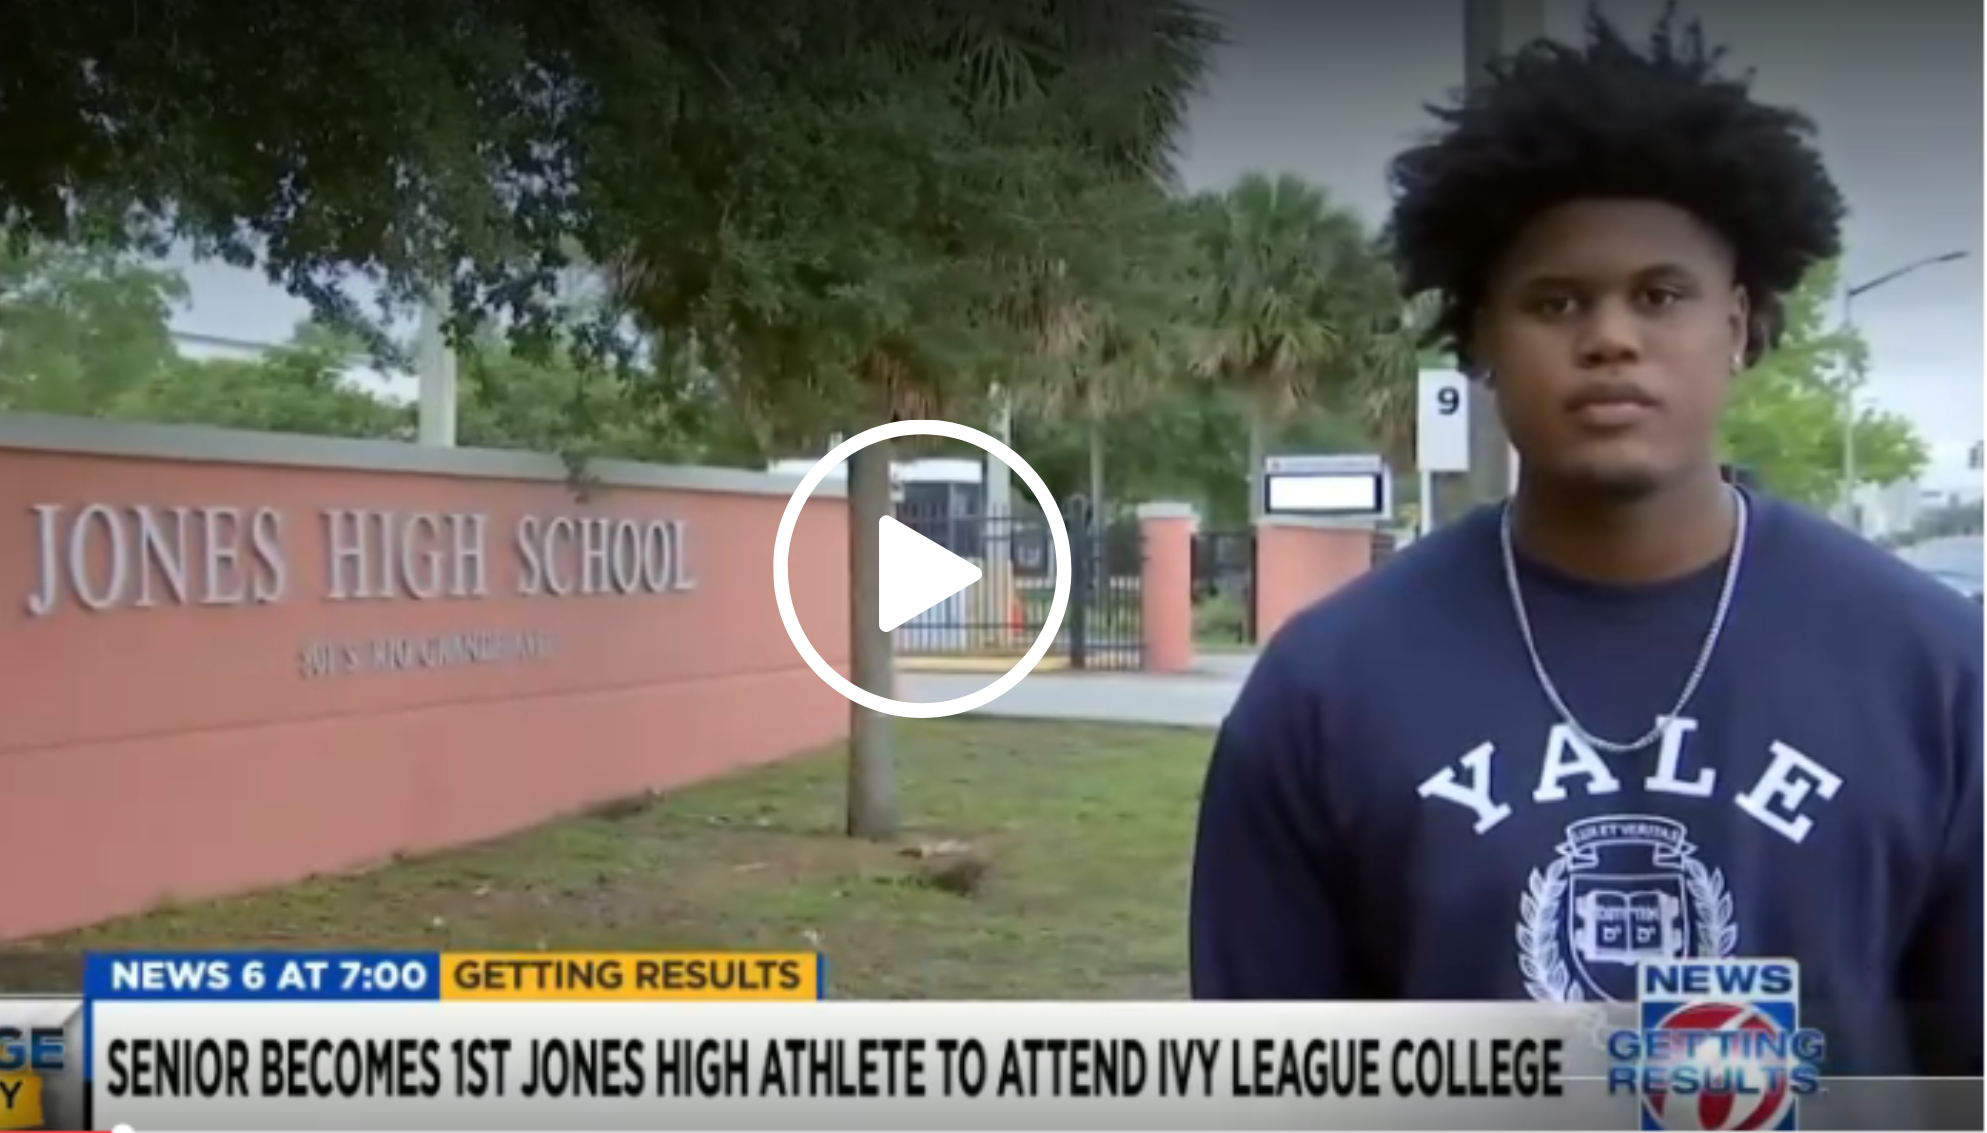 Senior Becomes 1st Jones High Athlete to Attend Ivy League College